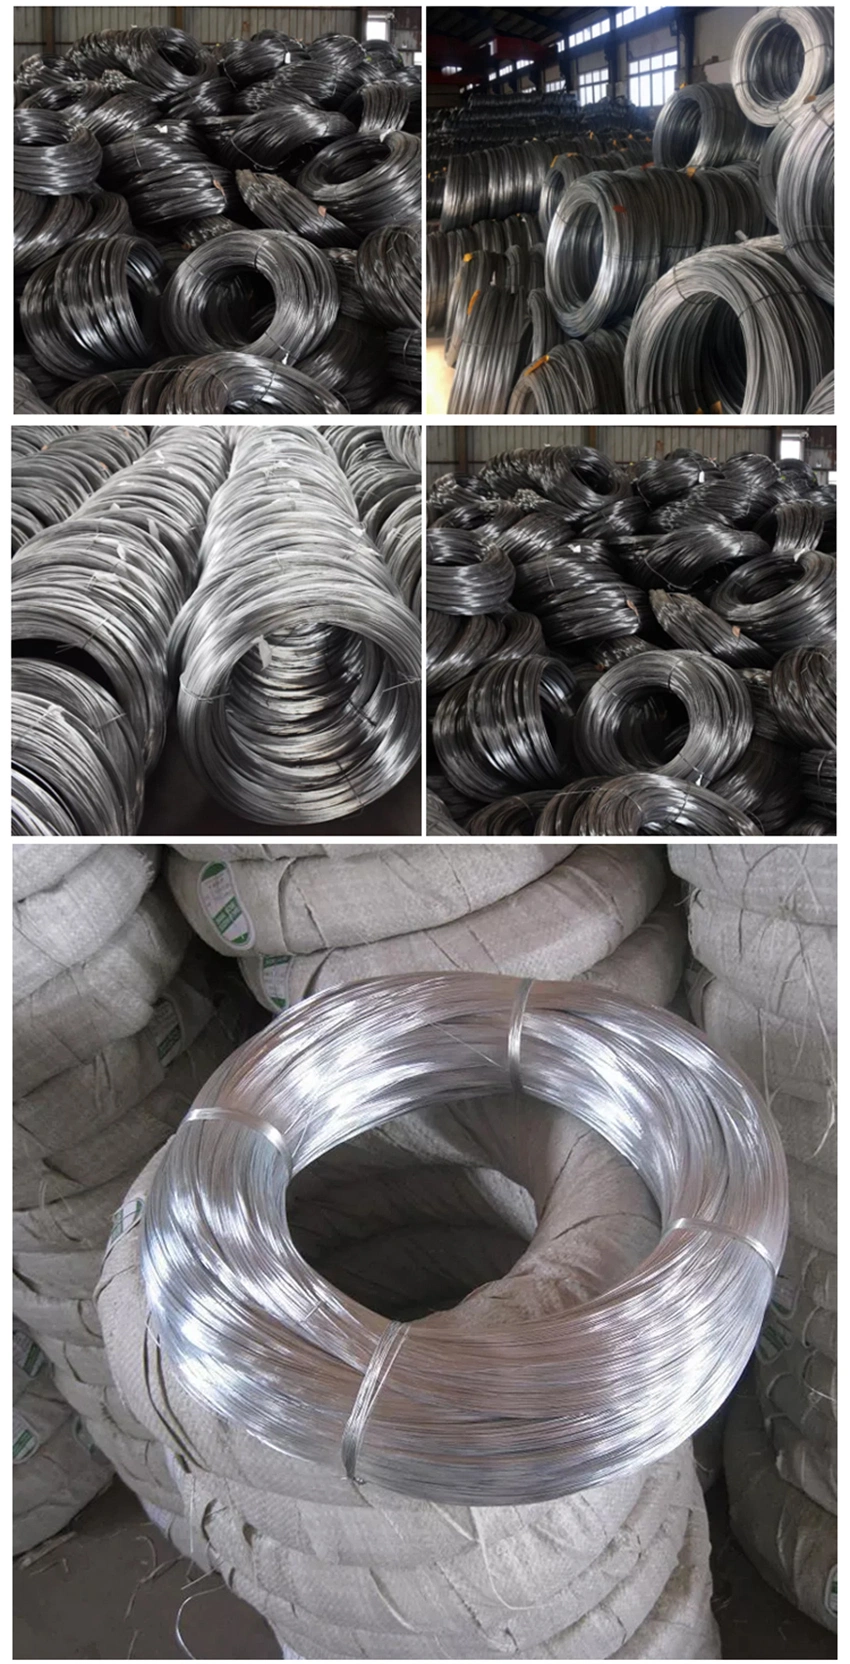 Bwg20 Hot Dipped Gi Steel Coil Flat Wire 12 16 Gauge 1.5mm 2.5mm Electro-Galvanized Iron Roll Spool Round Wire